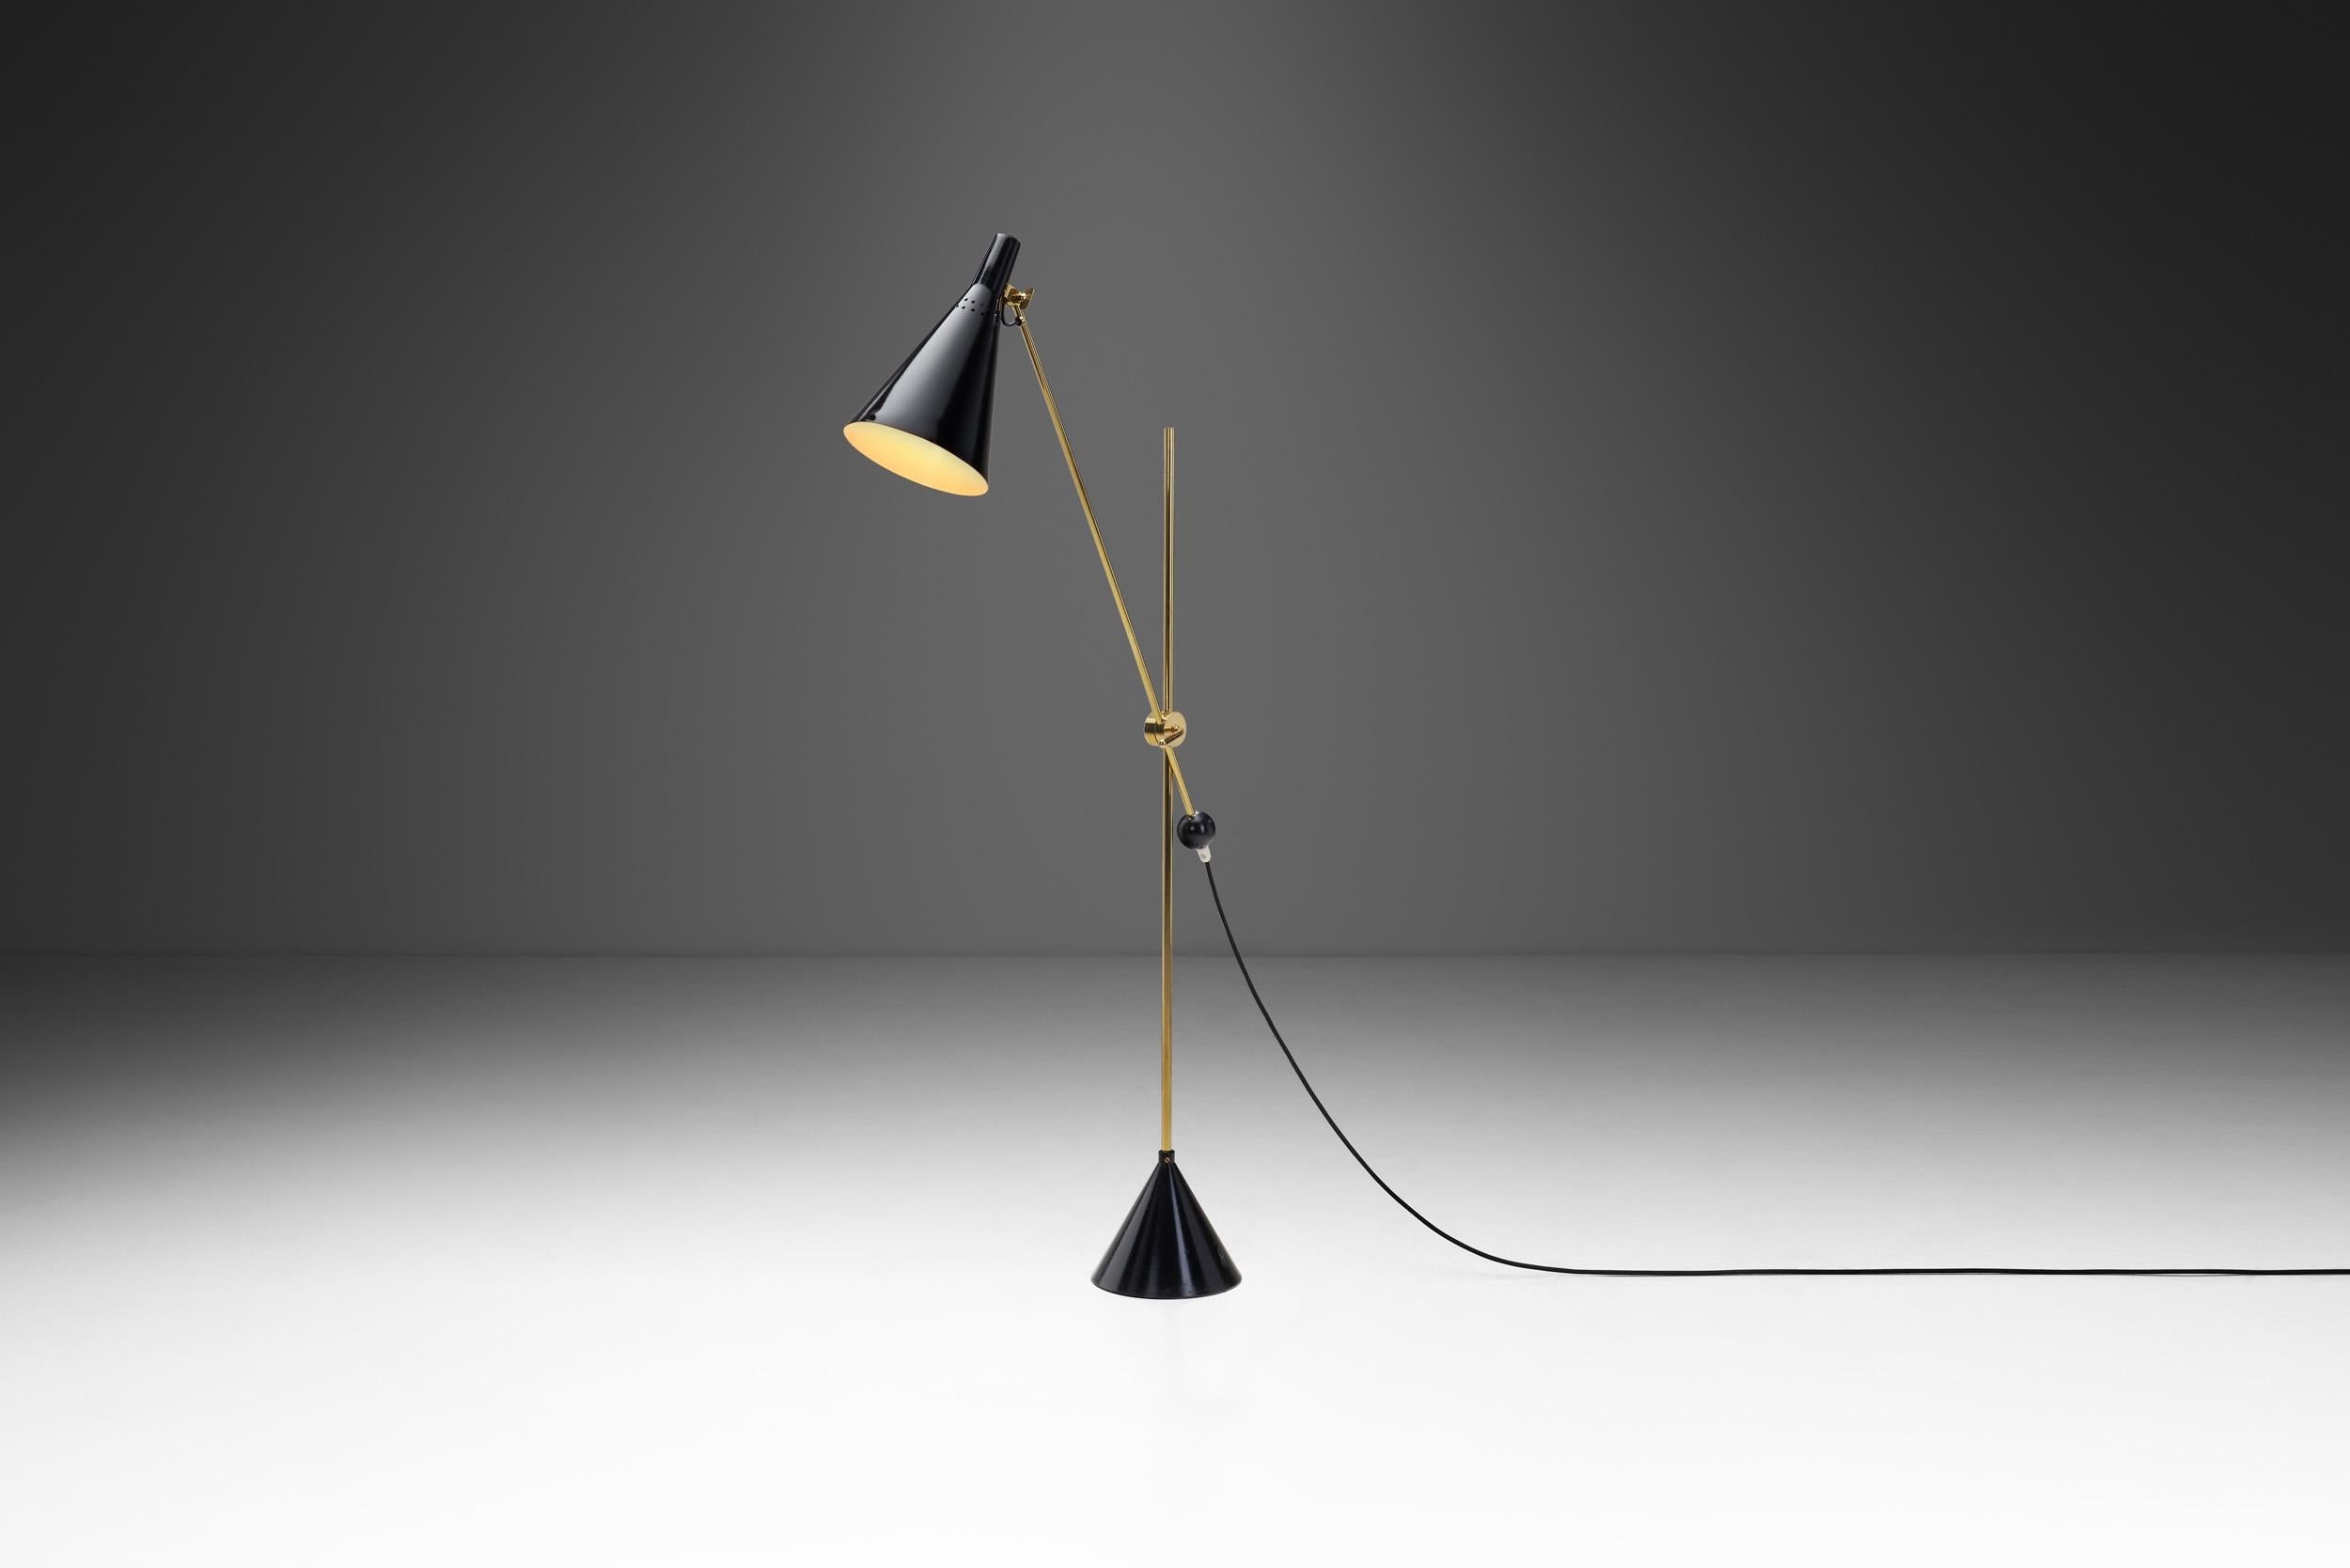 The “Crane” is evidence why Tapio Wirkkala can be described as one of the icons of Finnish design and a symbol of the international success of post-war Finnish design. He was a versatile designer and artist who could shift fluently between different